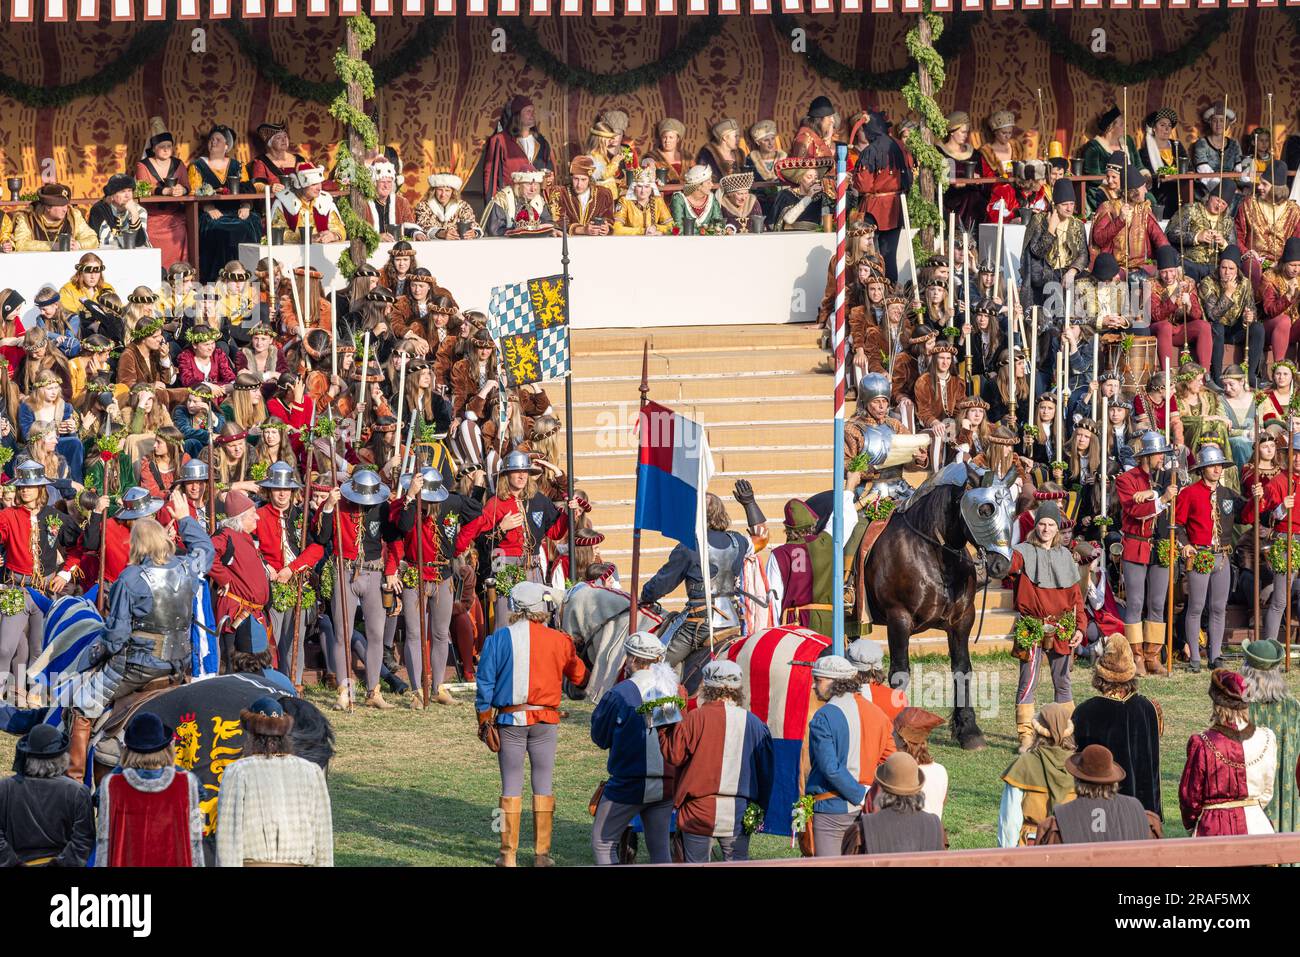 Landshut, GERMANY - July 2, 2023: The historical pageant 'Landshuter Hochzeit' celebrating the 1475 wedding of Hedwig and George. The knights are swor Stock Photo